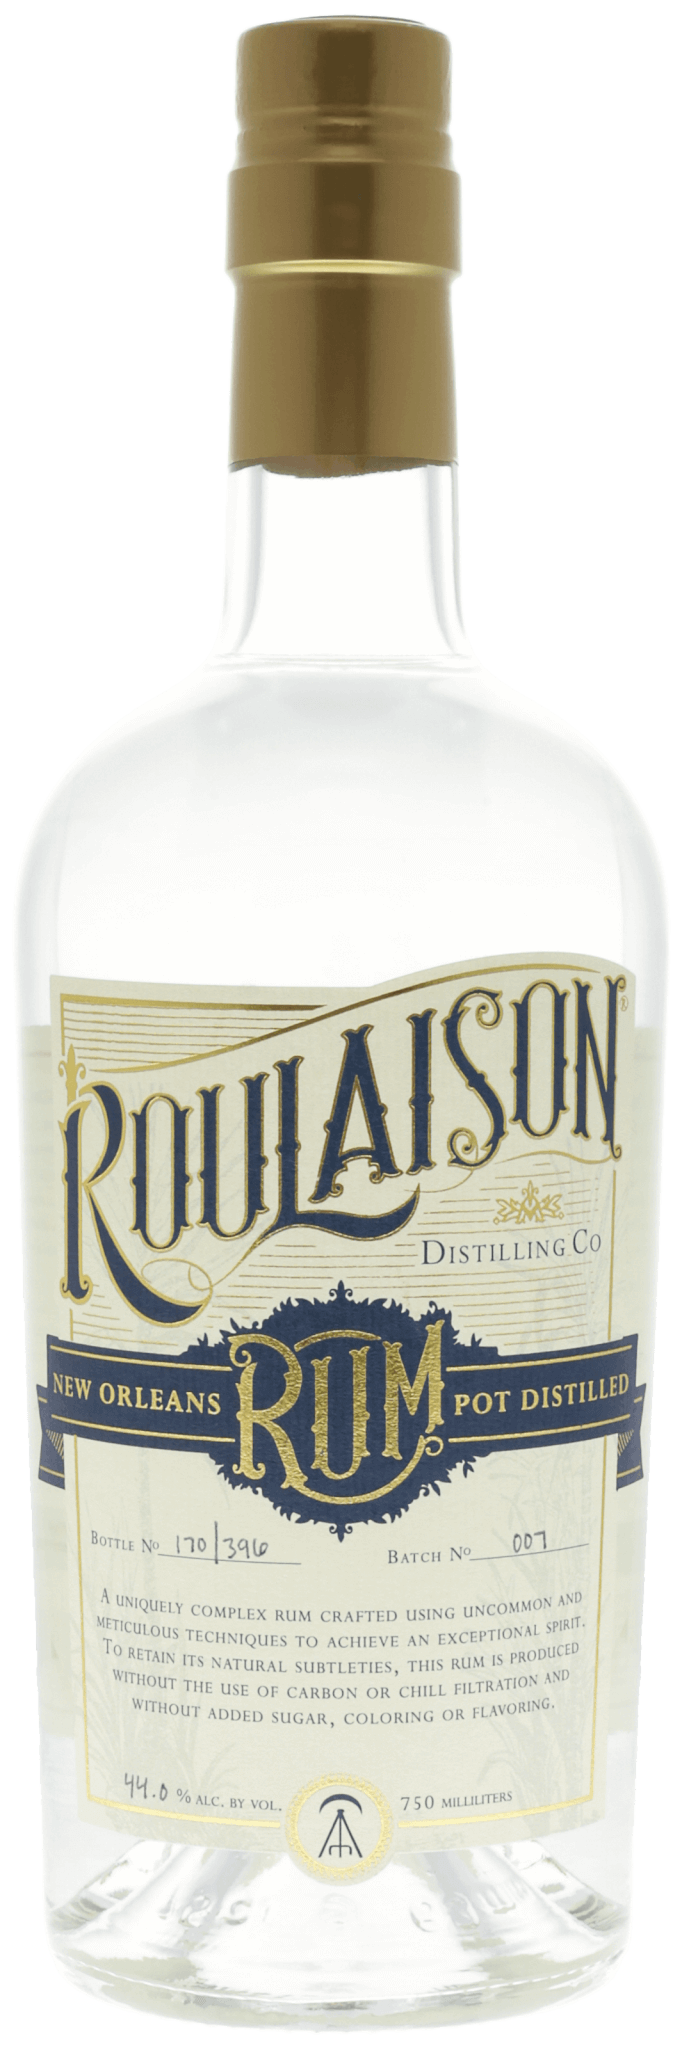 Traditional Pot Distilled Rum